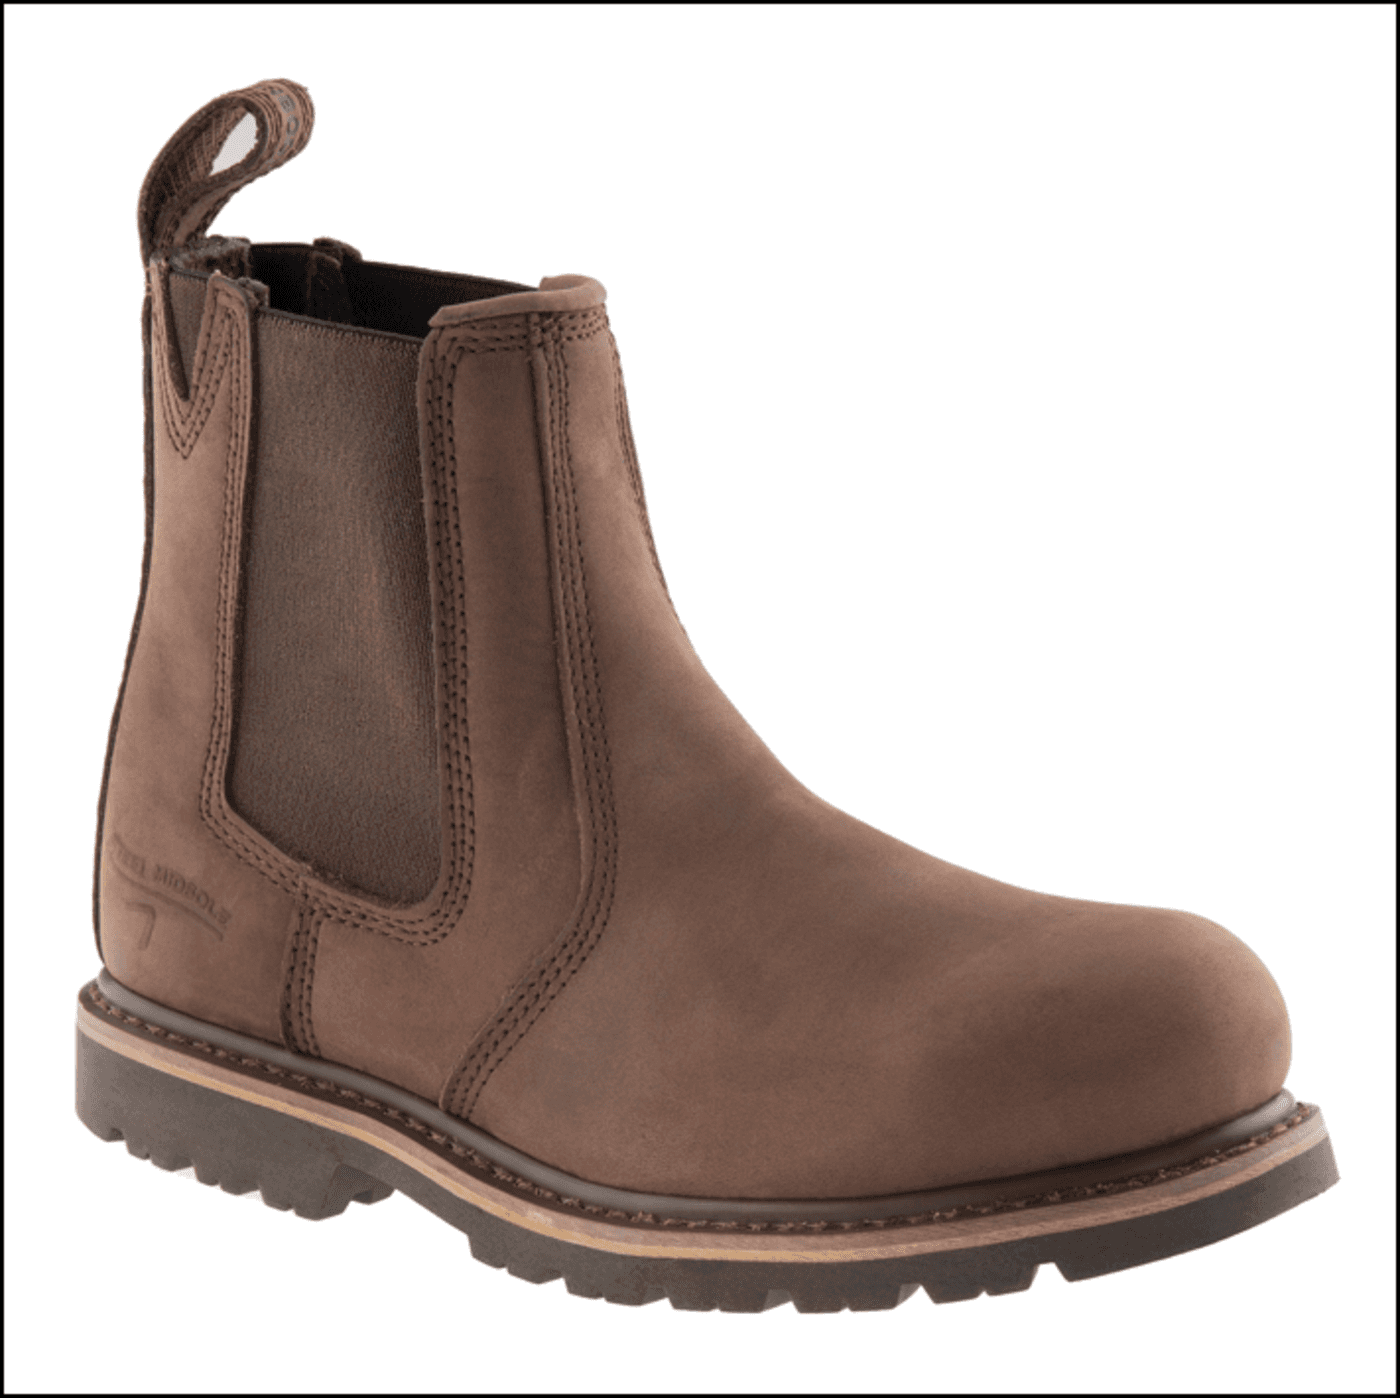 Buckler Boots | New Holland dealer in Yorkshire & Lincolnshire